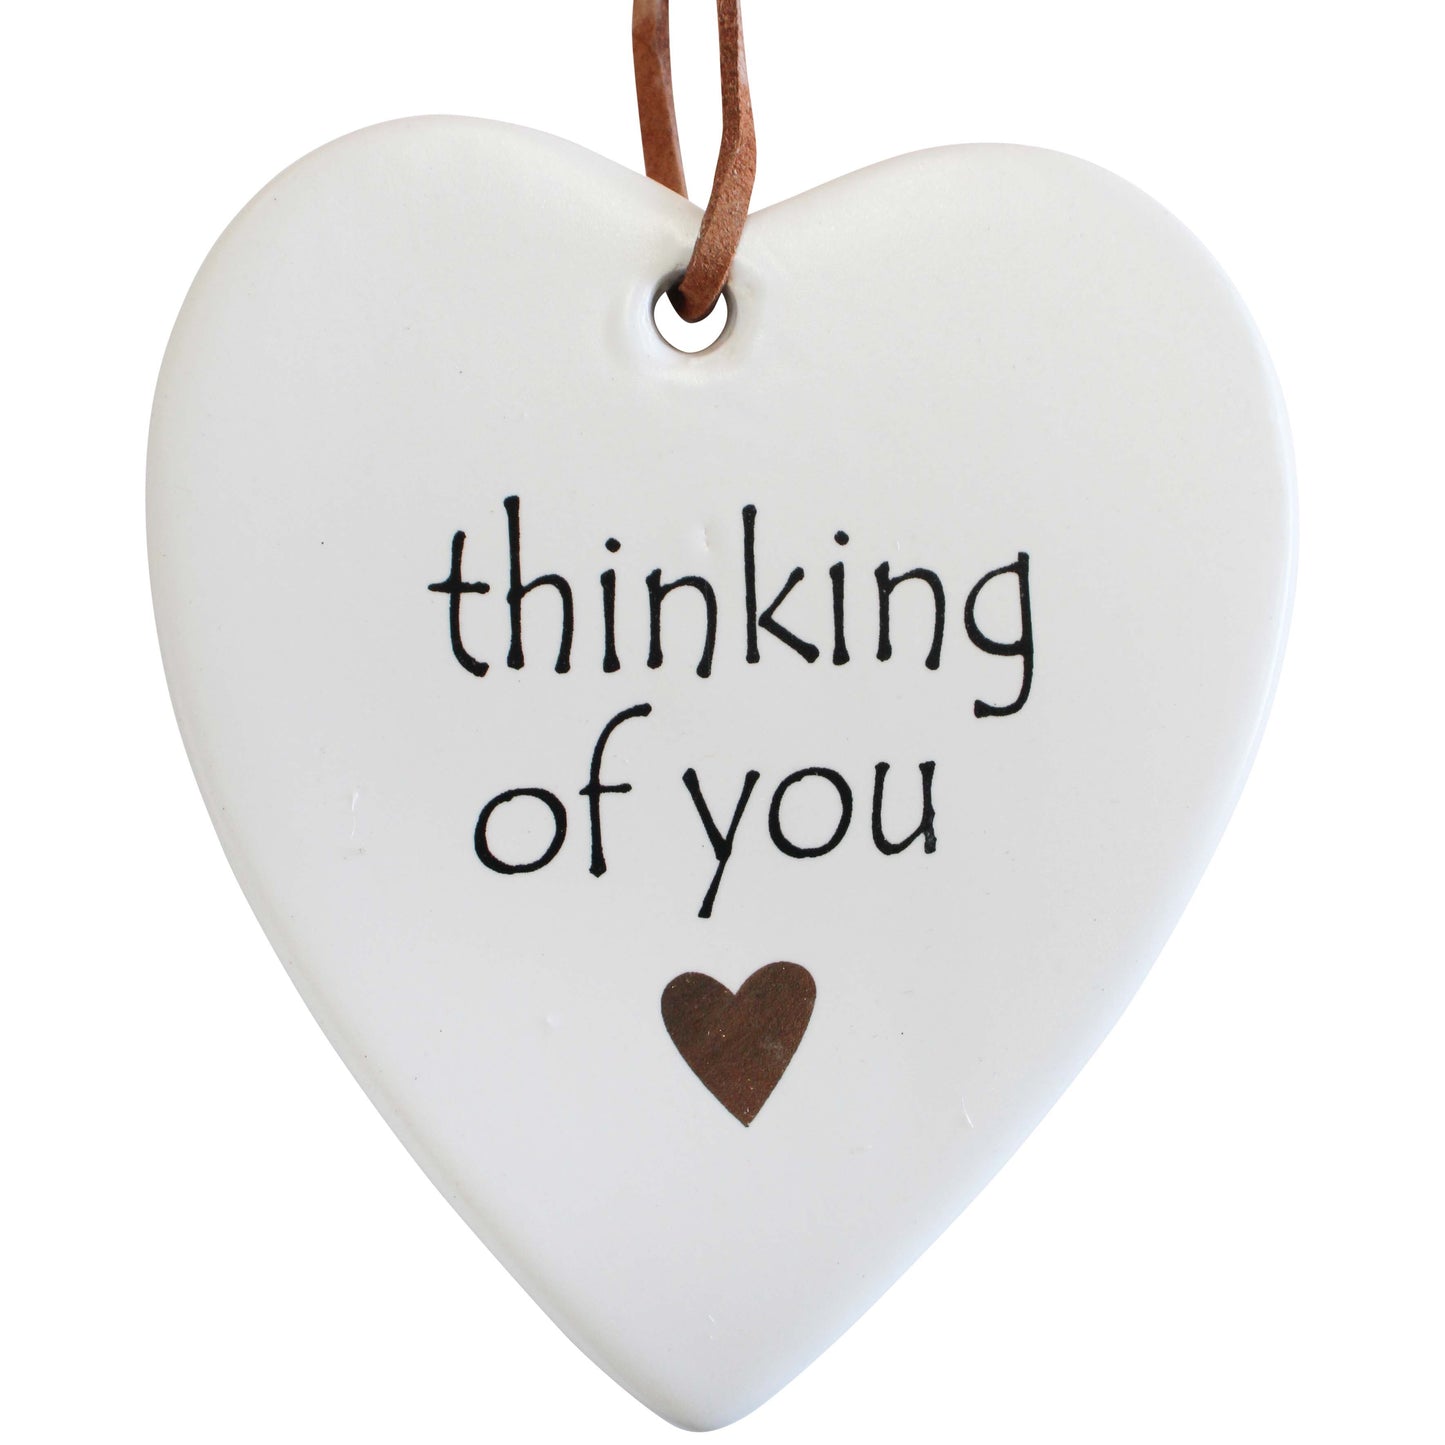 Thinking of You Ceramic Hanging Heart